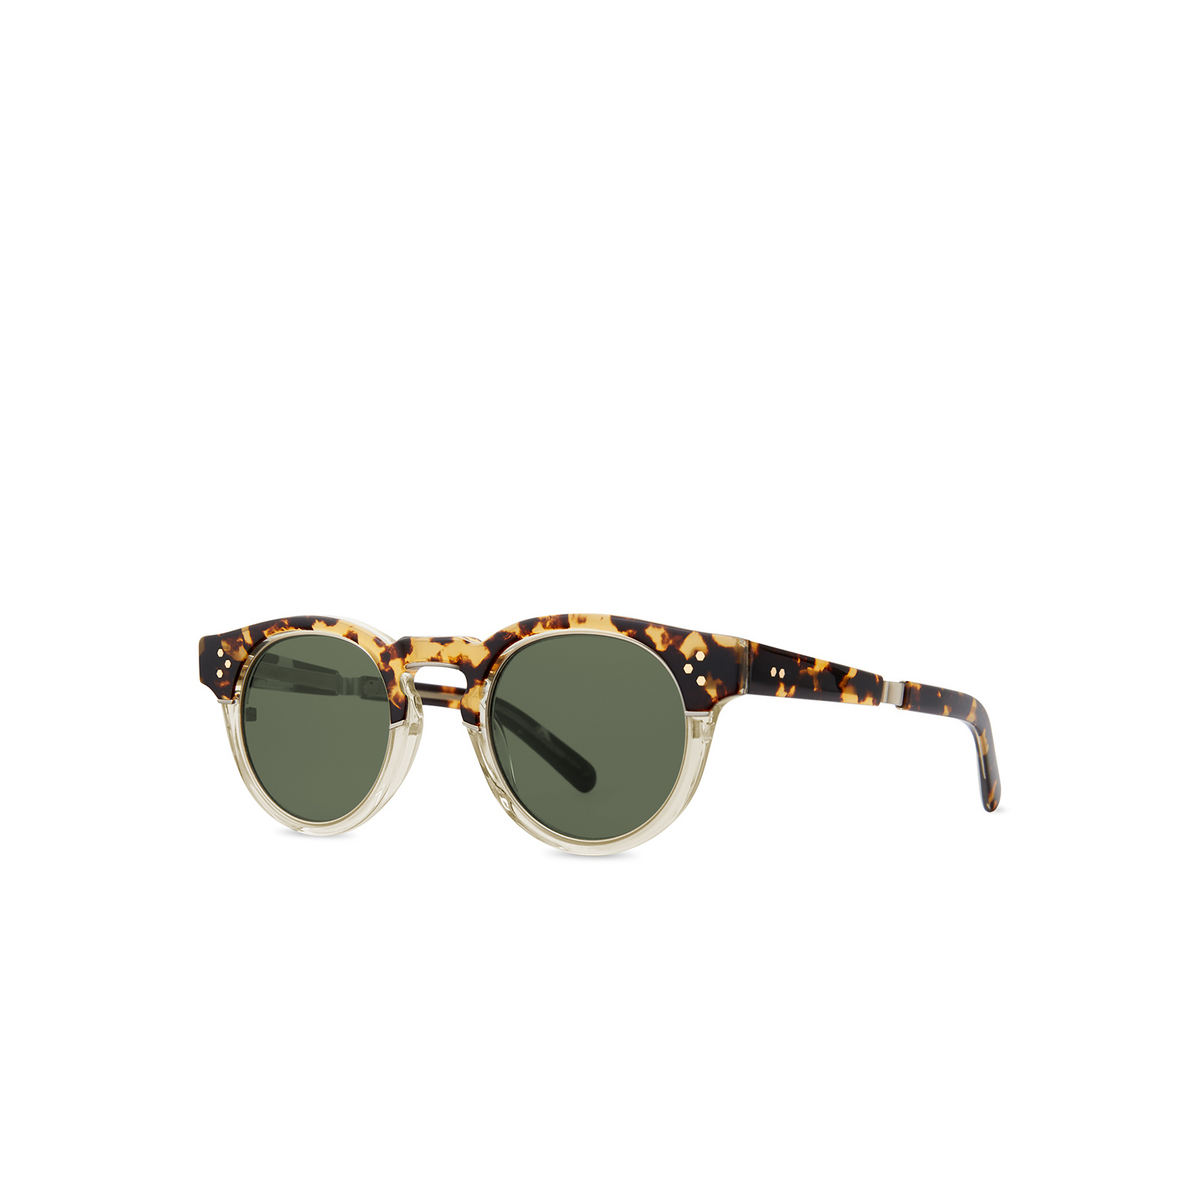 Mr. Leight® Round Sunglasses: Kennedy S color Bohemian Tortoise-12k Matte White Gold/green BOTO-12KMWG/GRN - three-quarters view.